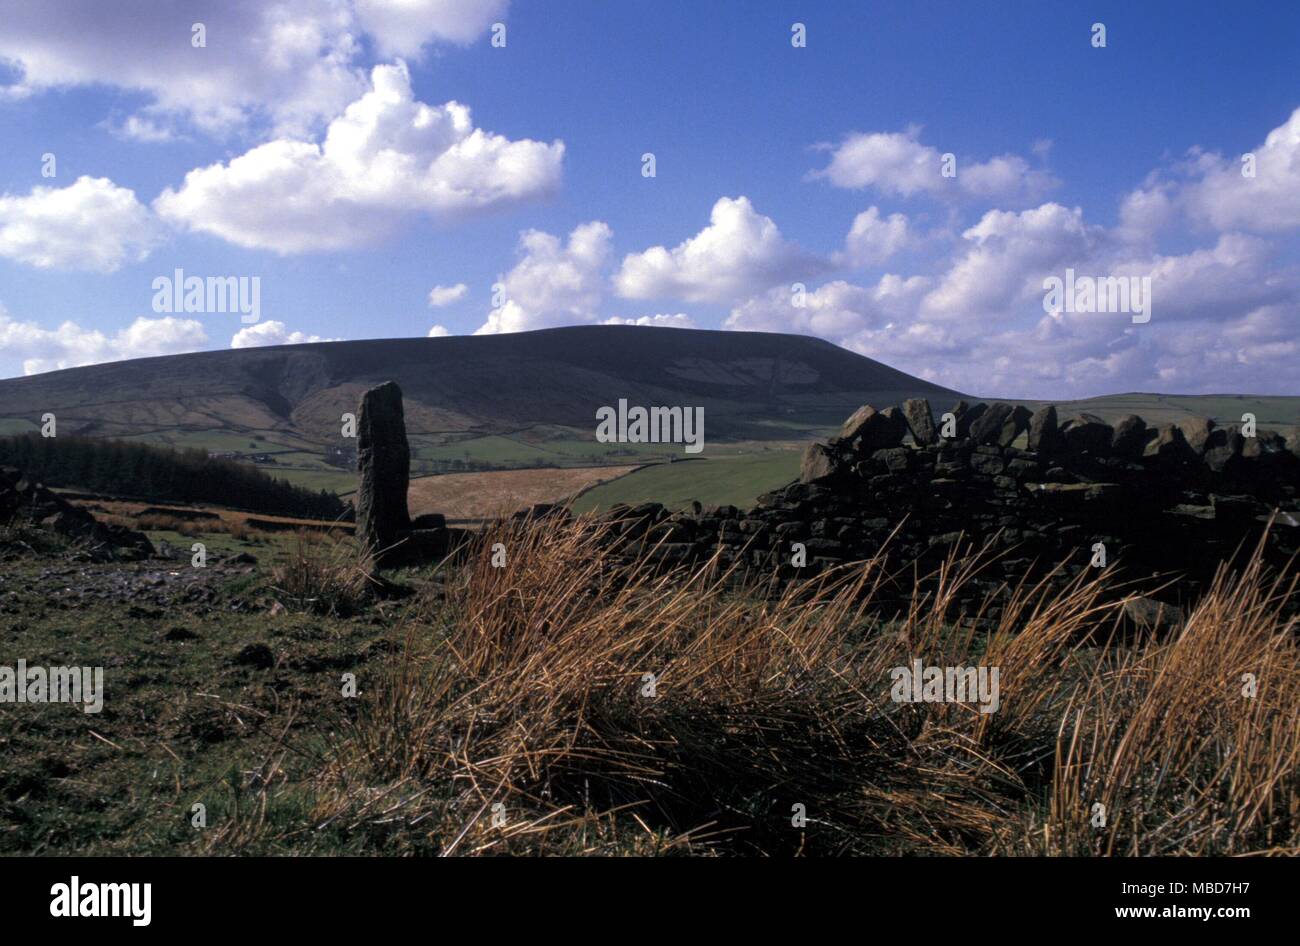 Newchurch in Pendle Hill, from the Lancashire side. The hill was an infamous haunt of witches. Stock Photo